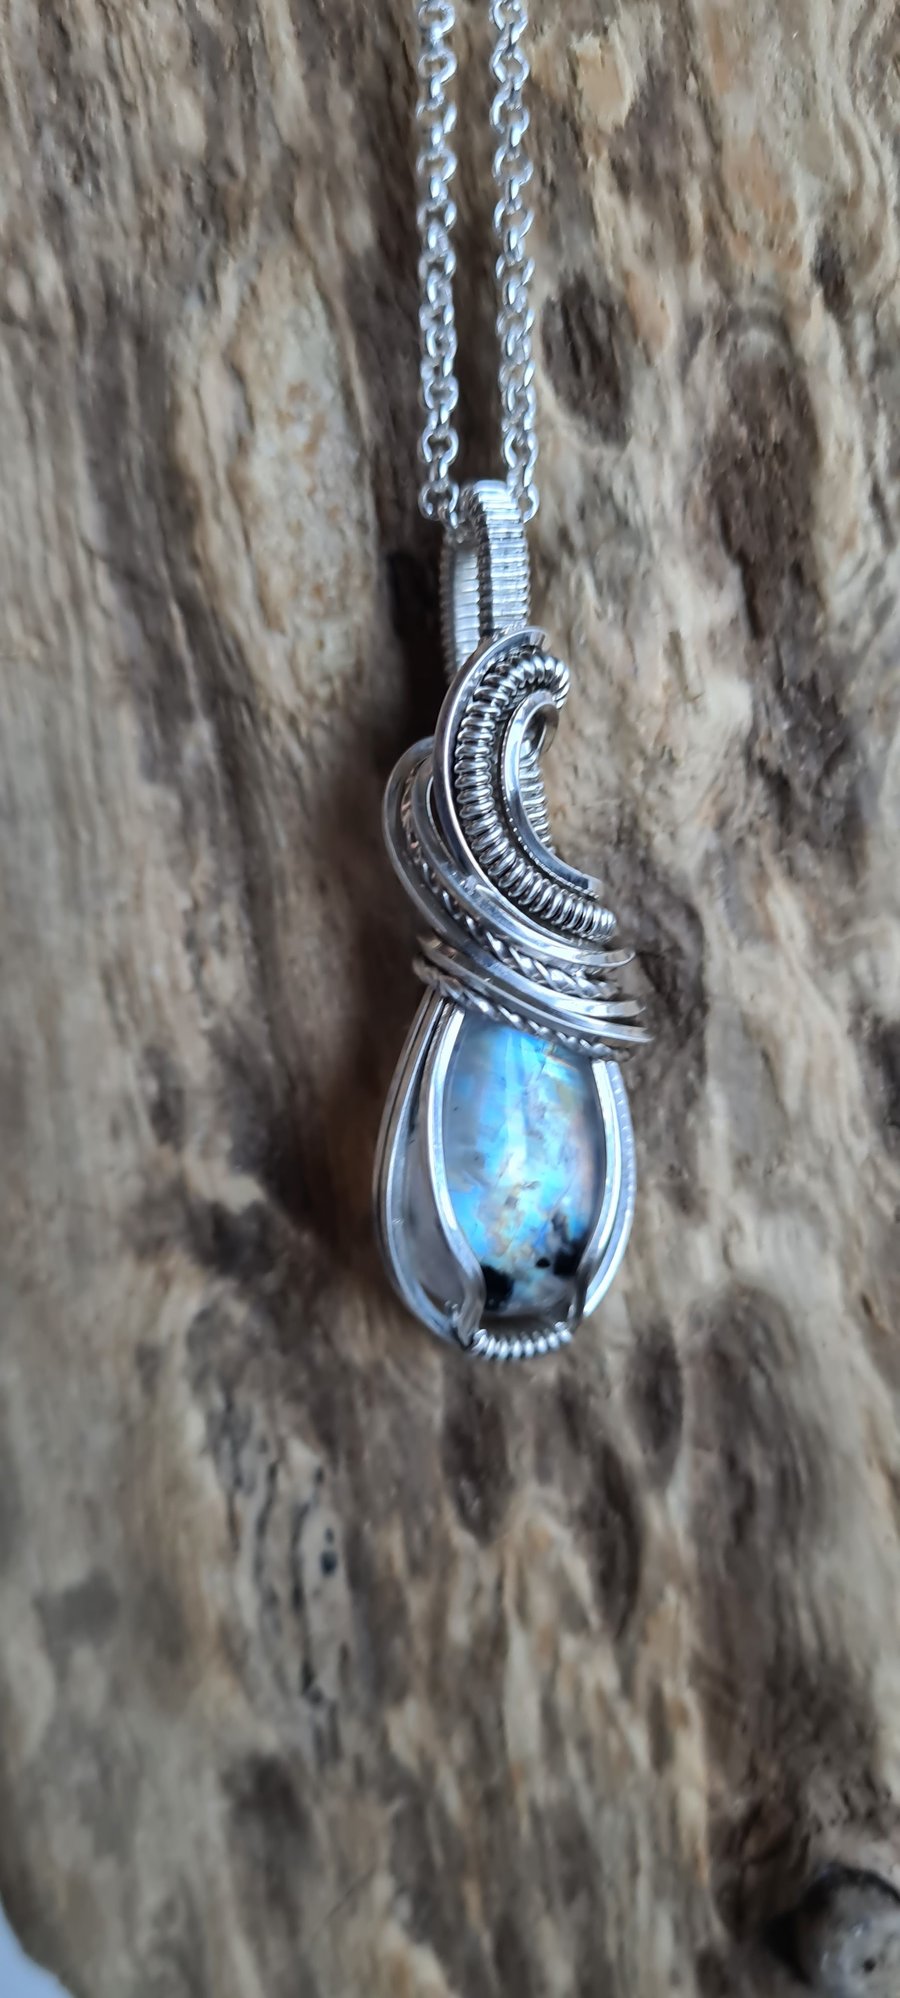 Handmade Natural Rainbow Moonstone & 925 Silver Necklace Pendant with Chain